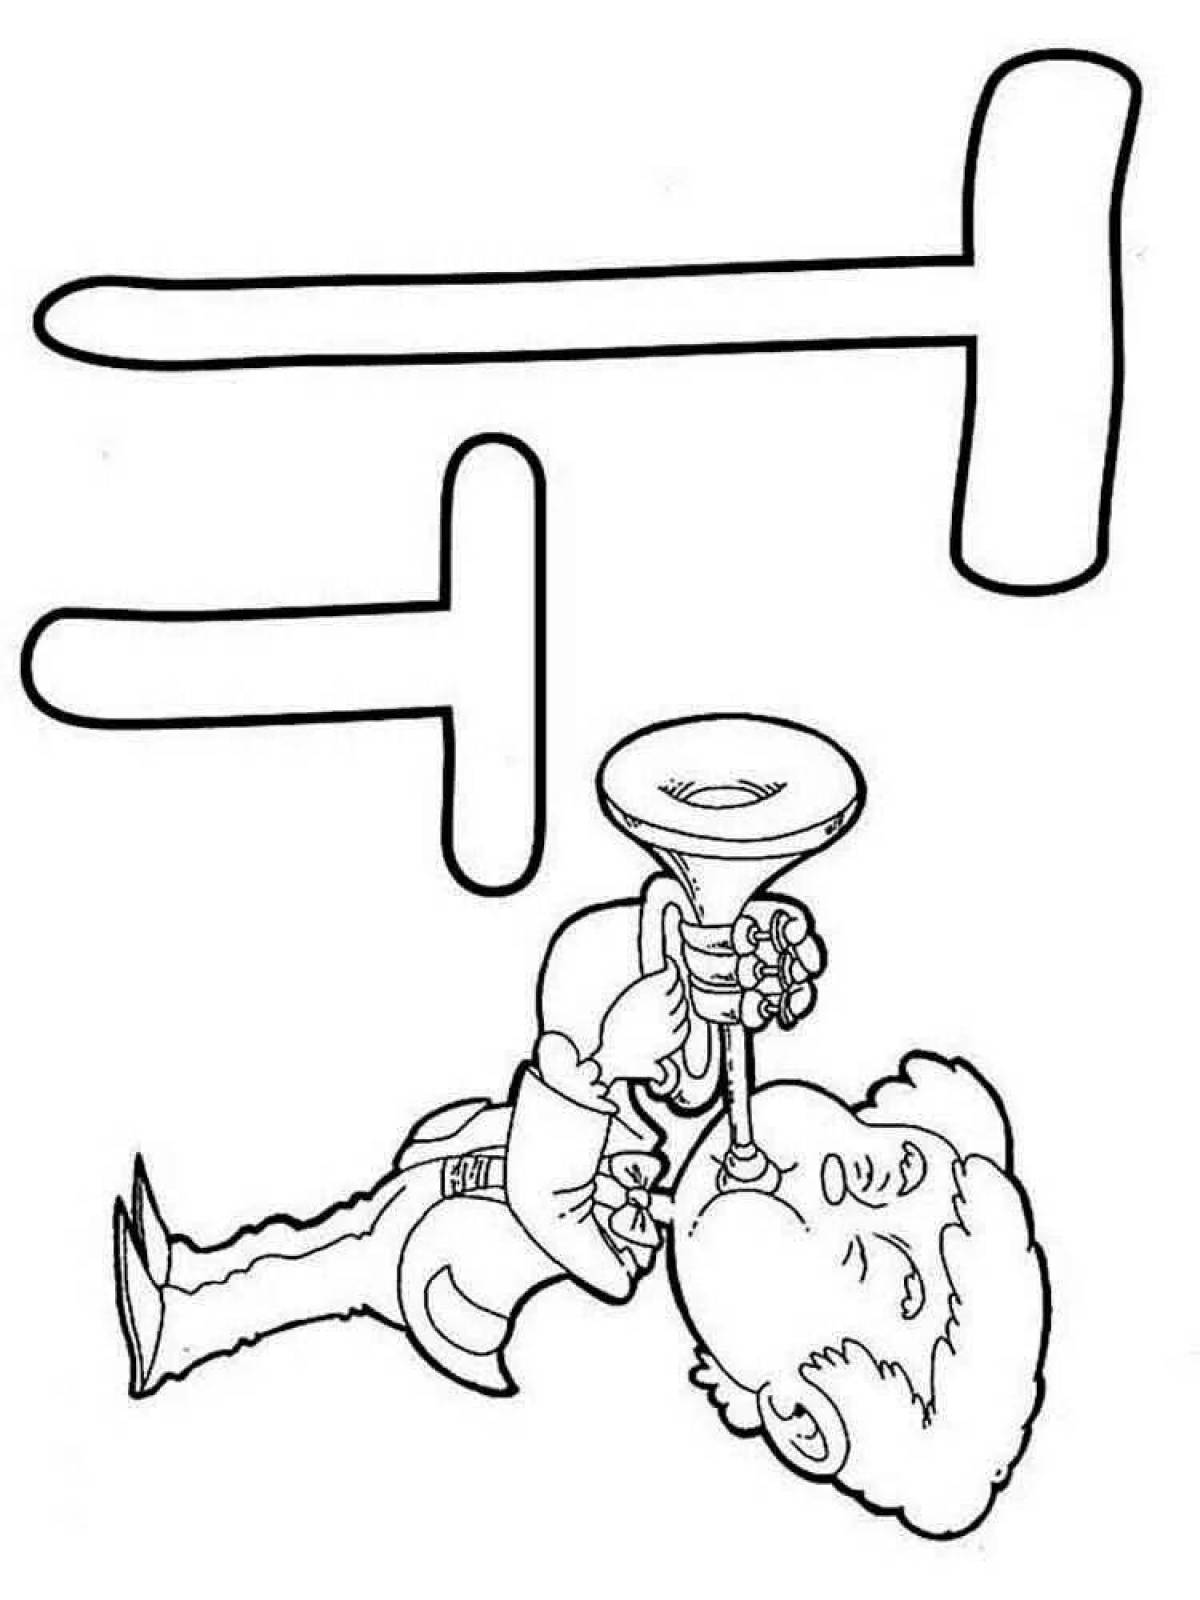 Exciting coloring pages with letters